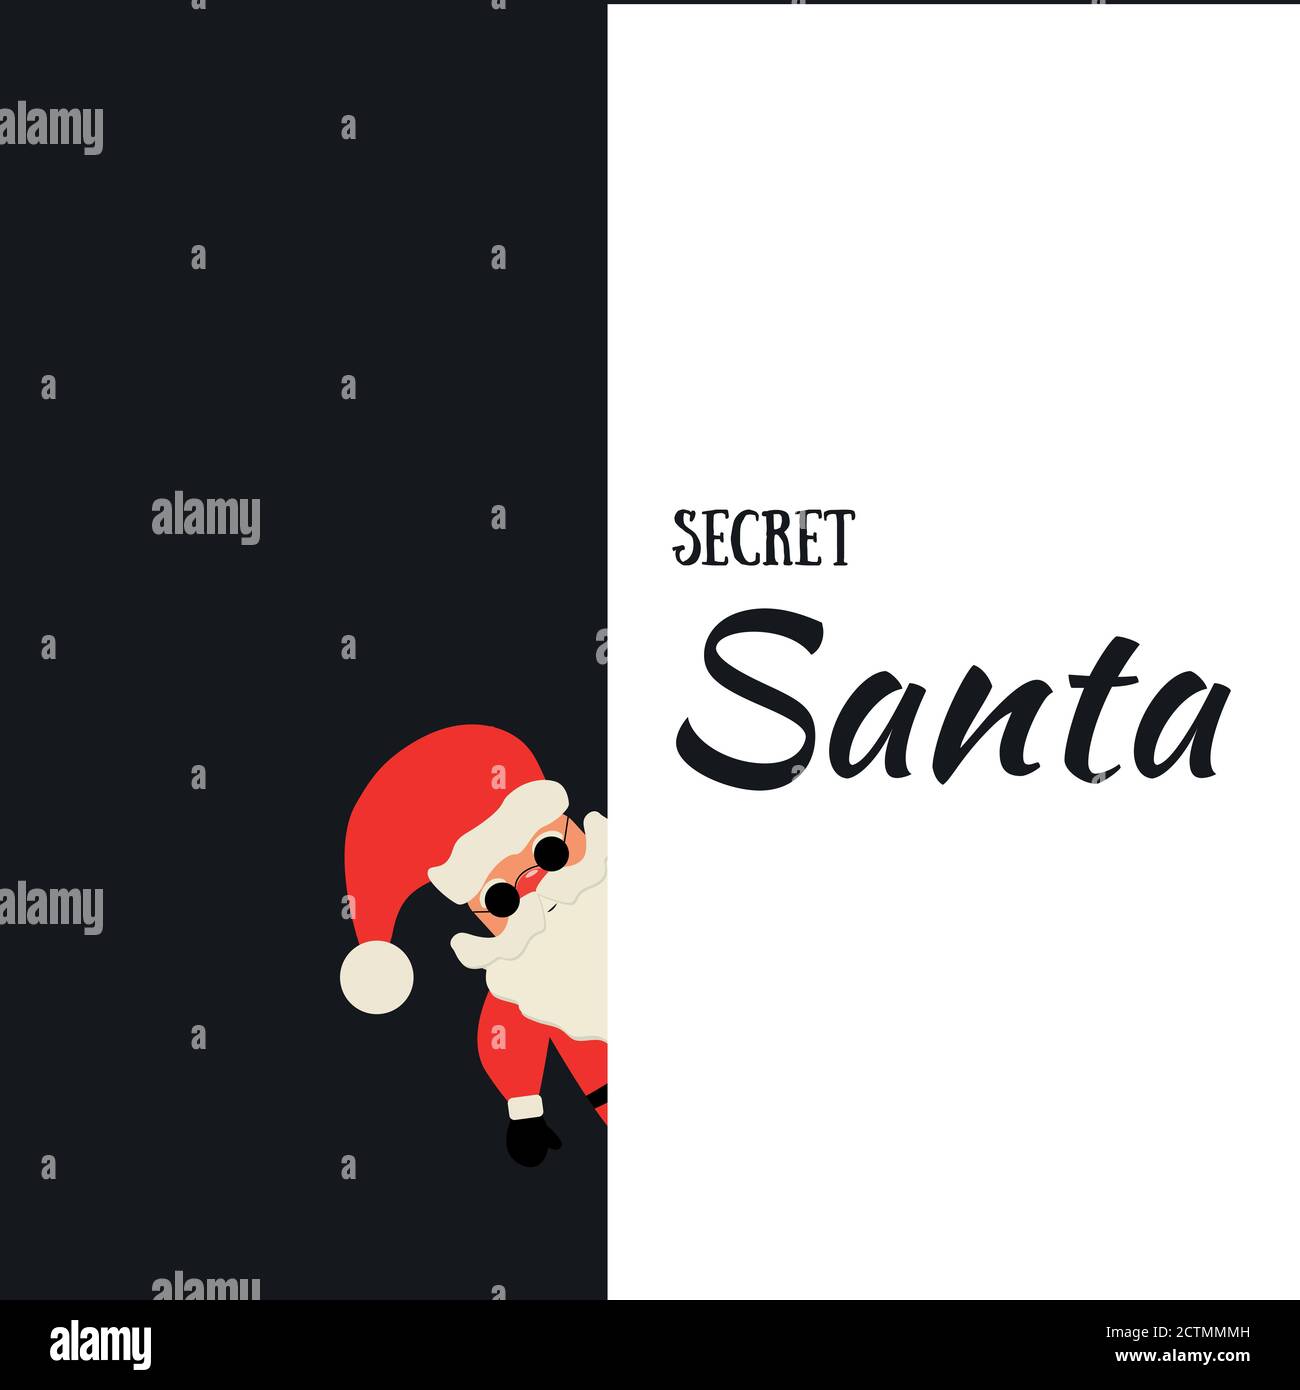 Secret Santa Claus invitation background with cartoon Santa Claus peeking out from behind the poster. vector illustration. Stock Vector